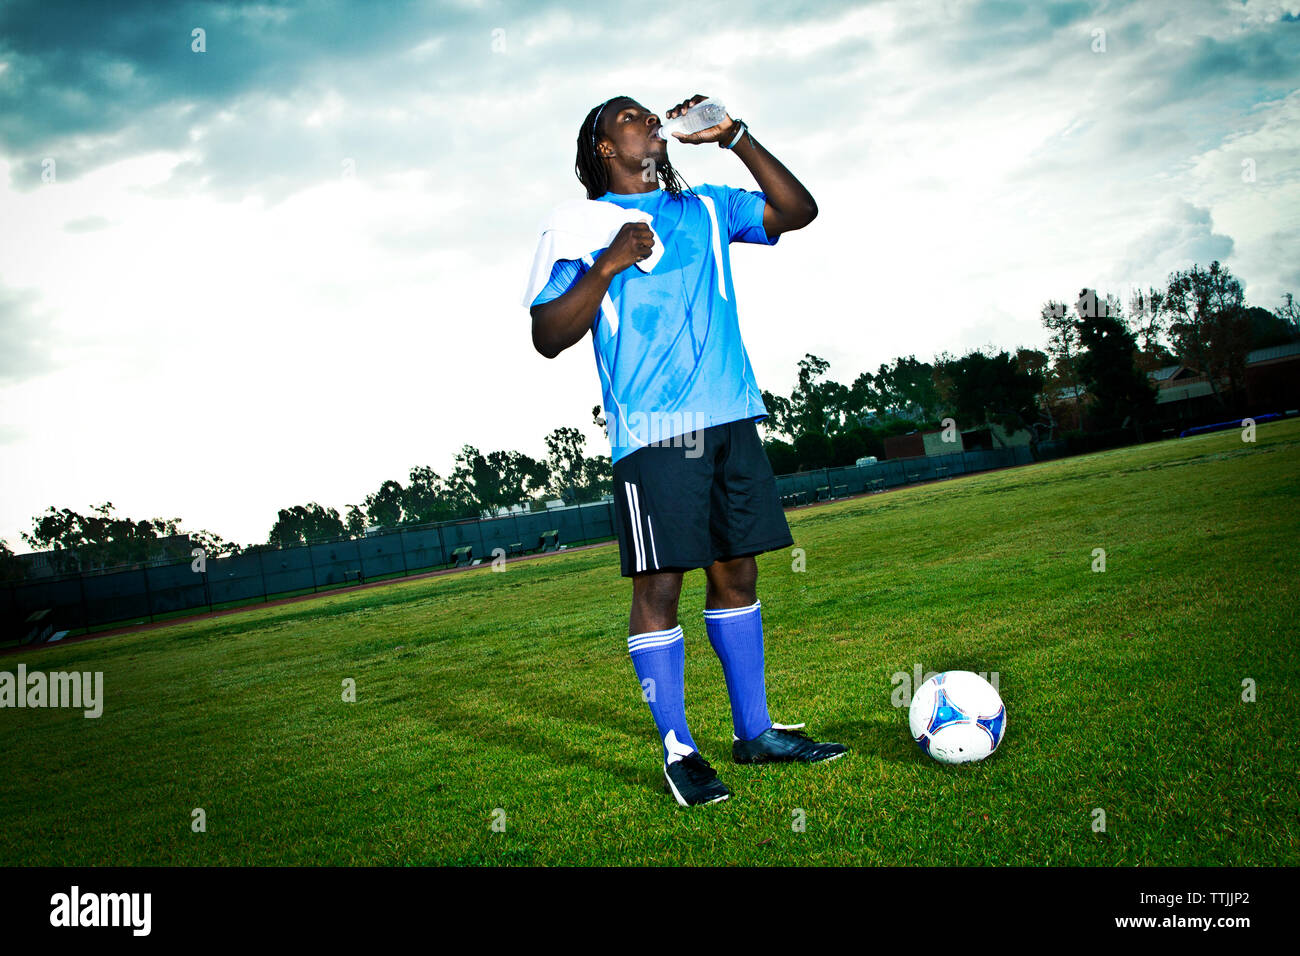 Man drinking water while standing in soccer field Stock Photo